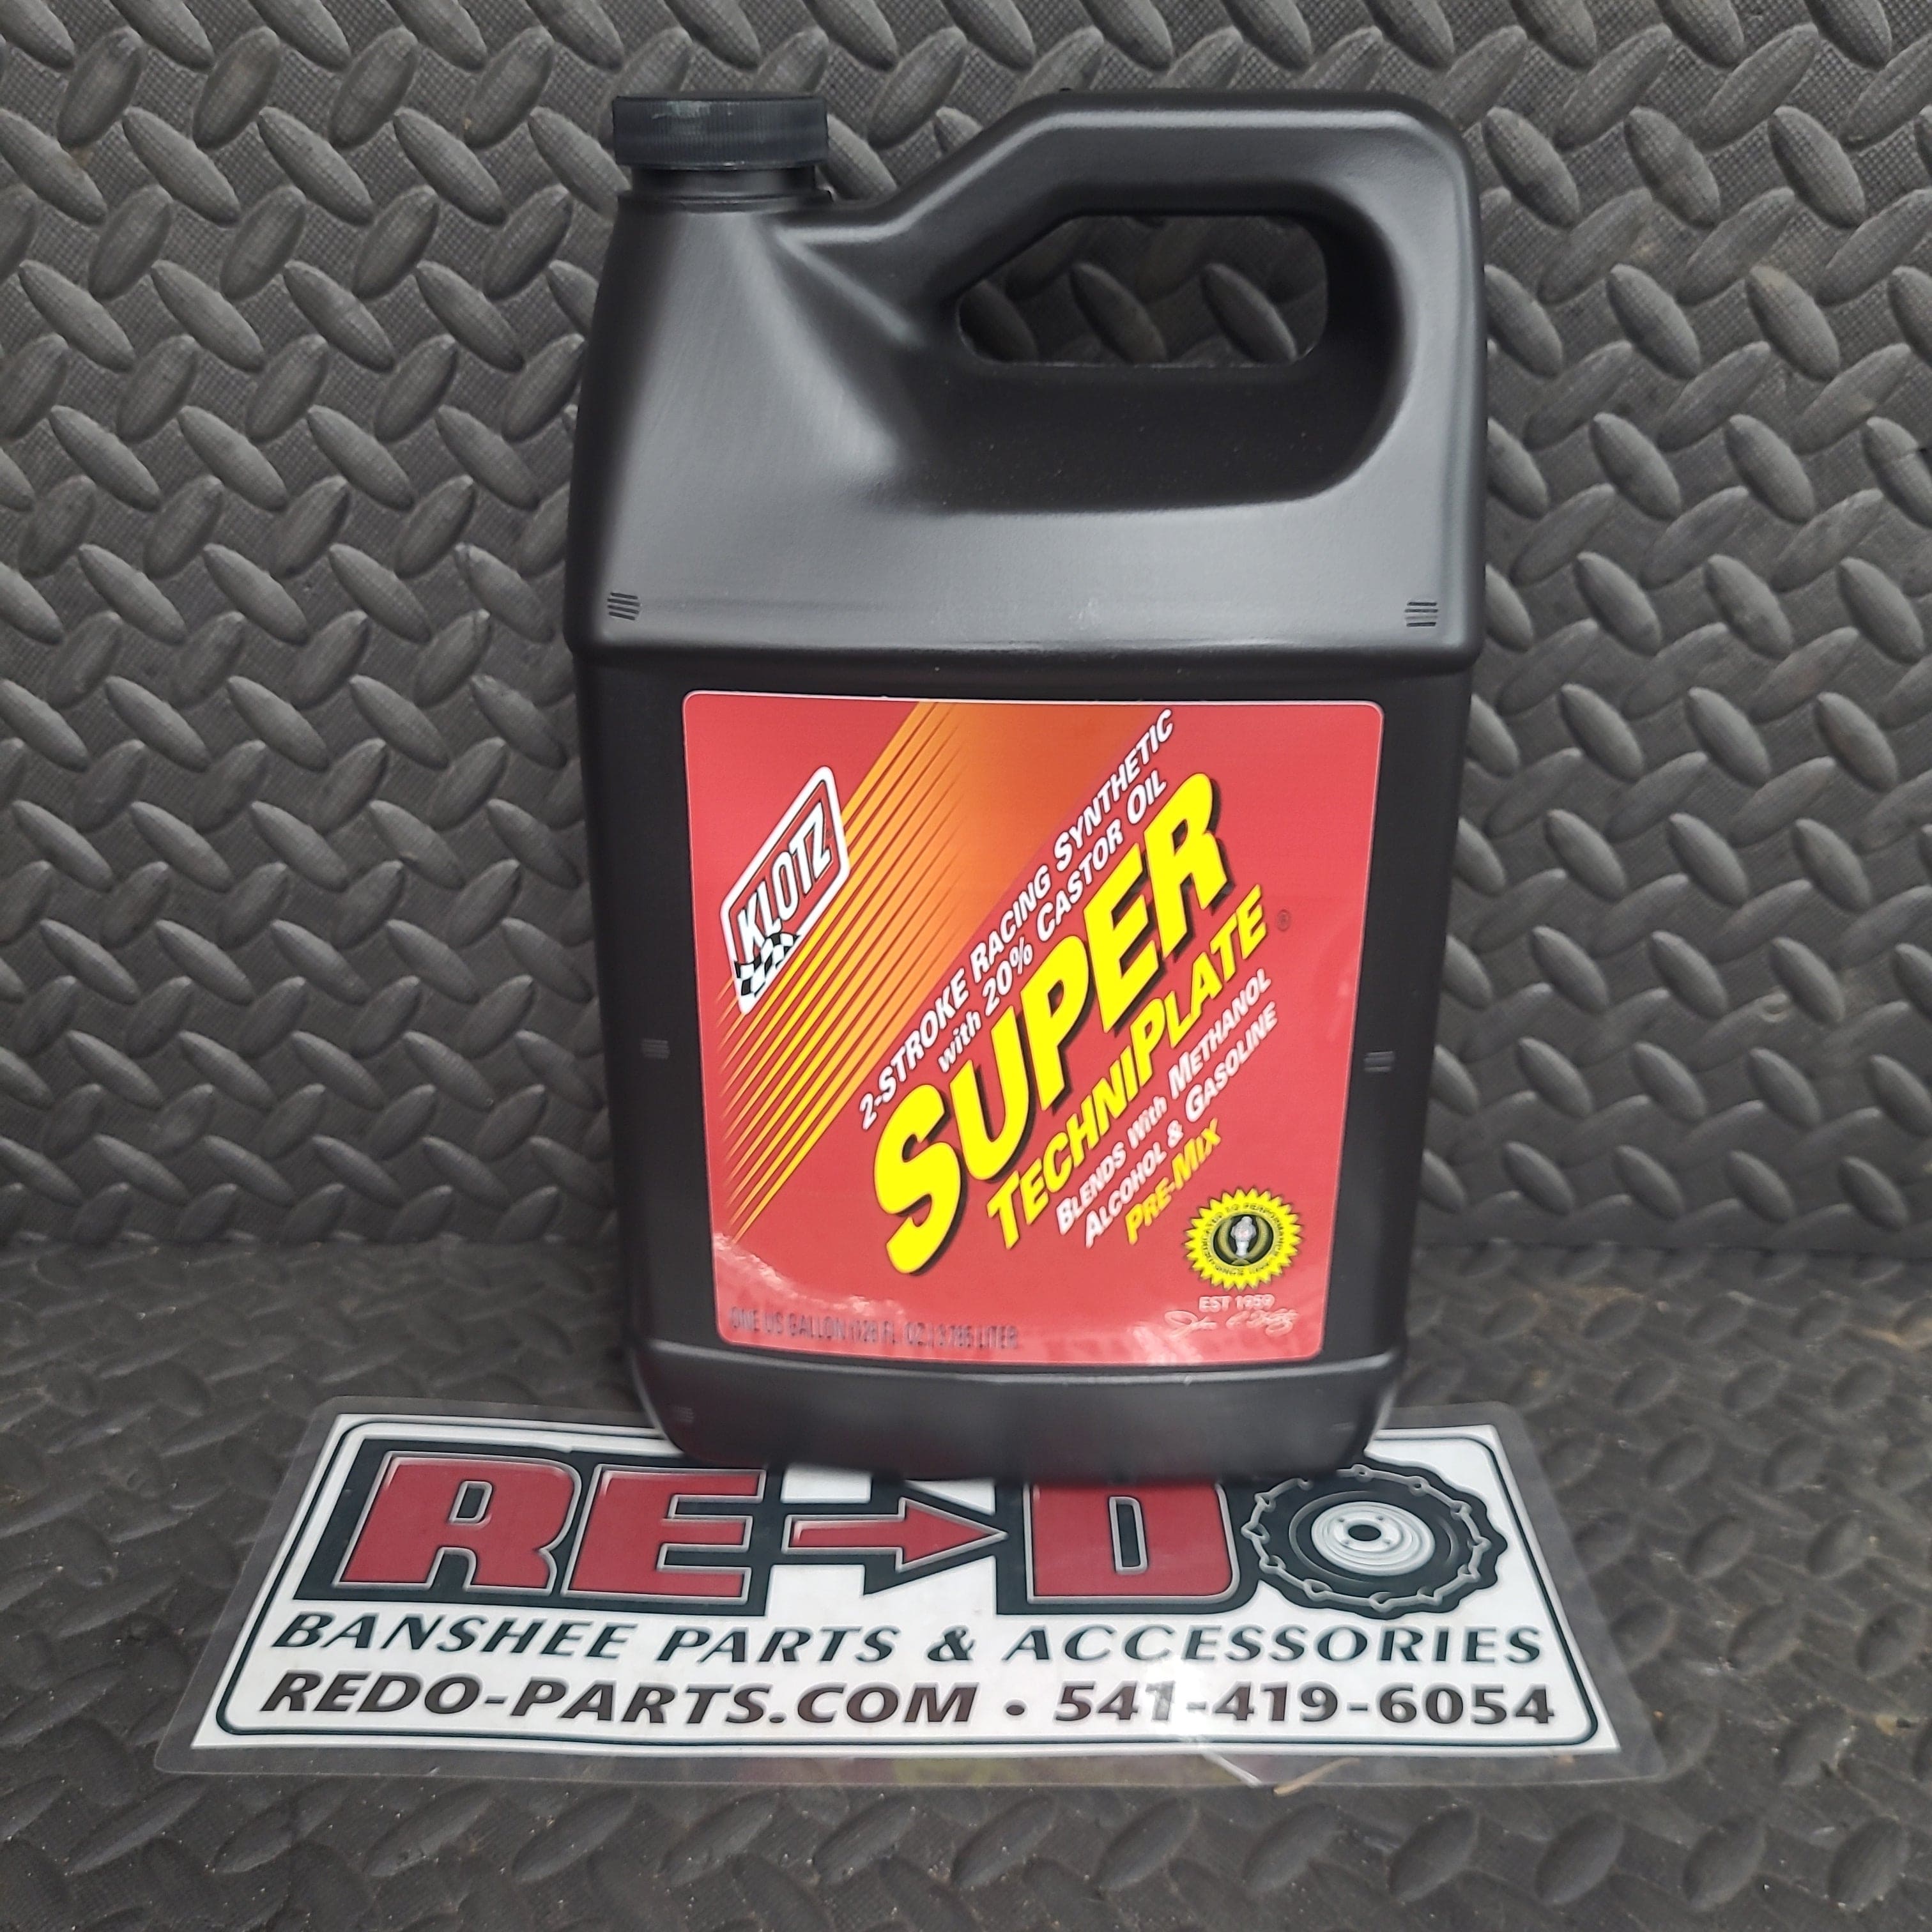 50:1 TECHNIPLATE® SYNTHETIC LUBRICANT (Size: 1 quart bottle)